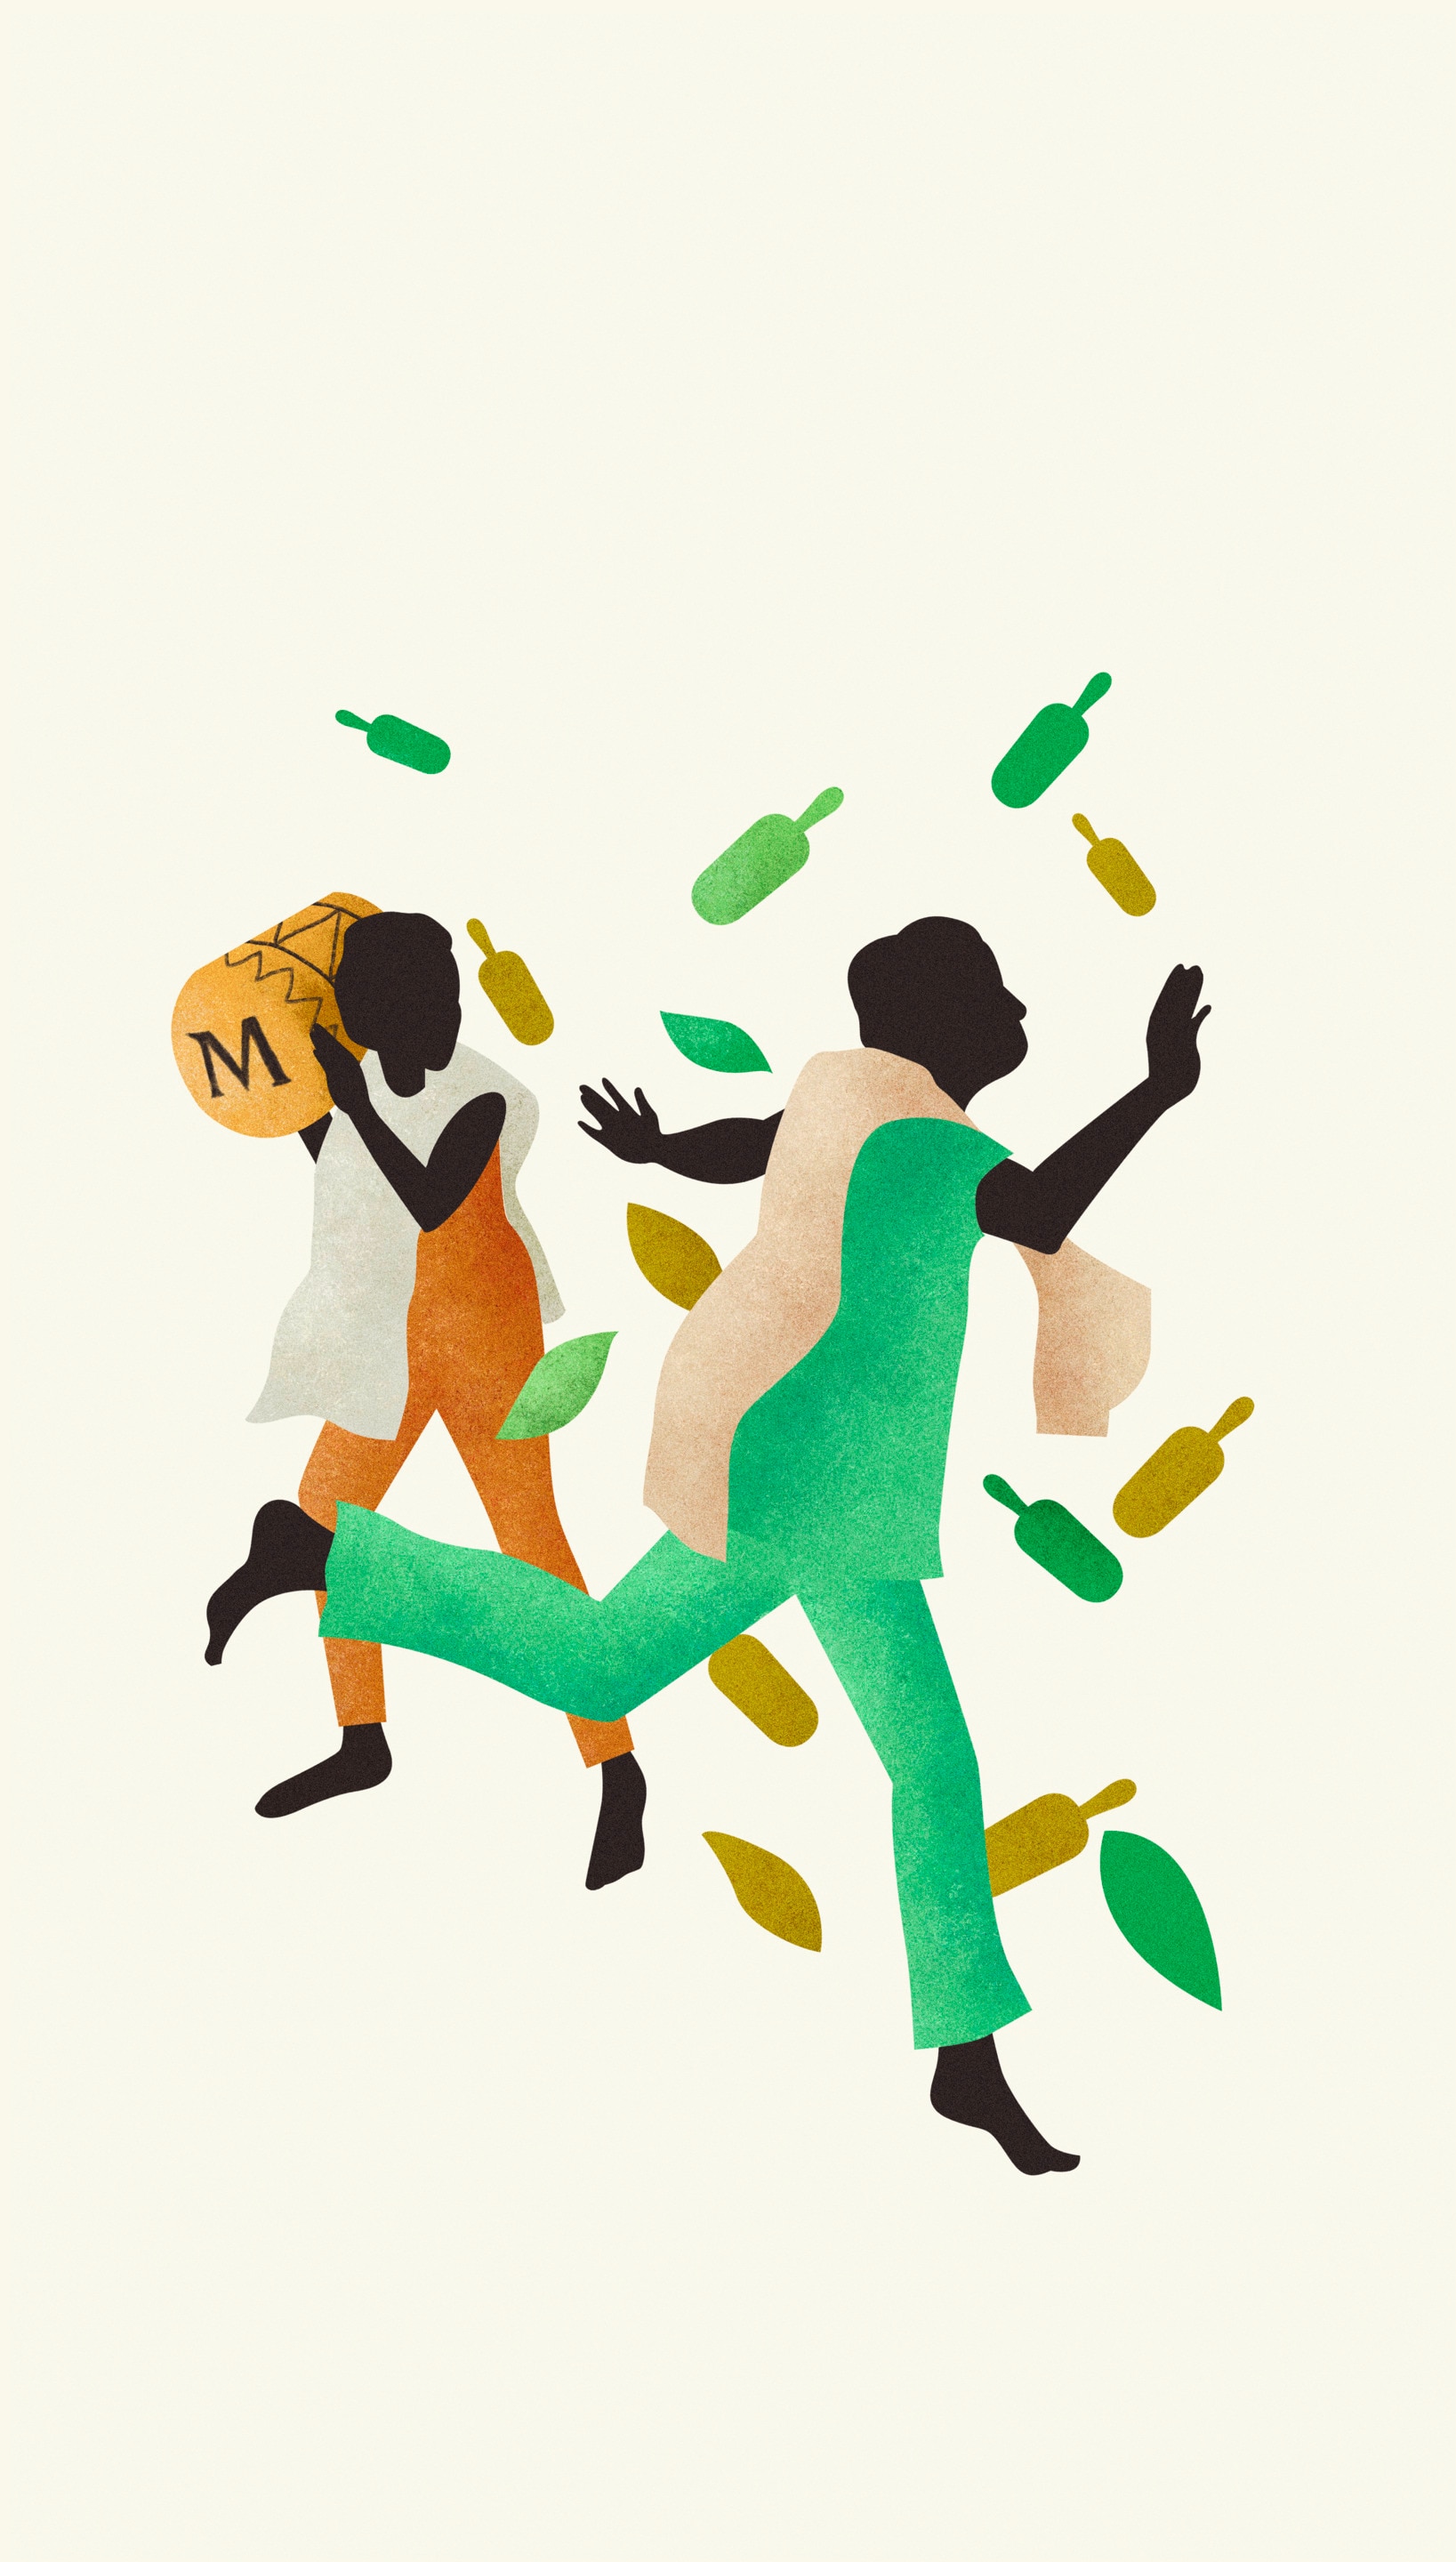 Illustration of two people dancing, and falling green magnums and leaves.